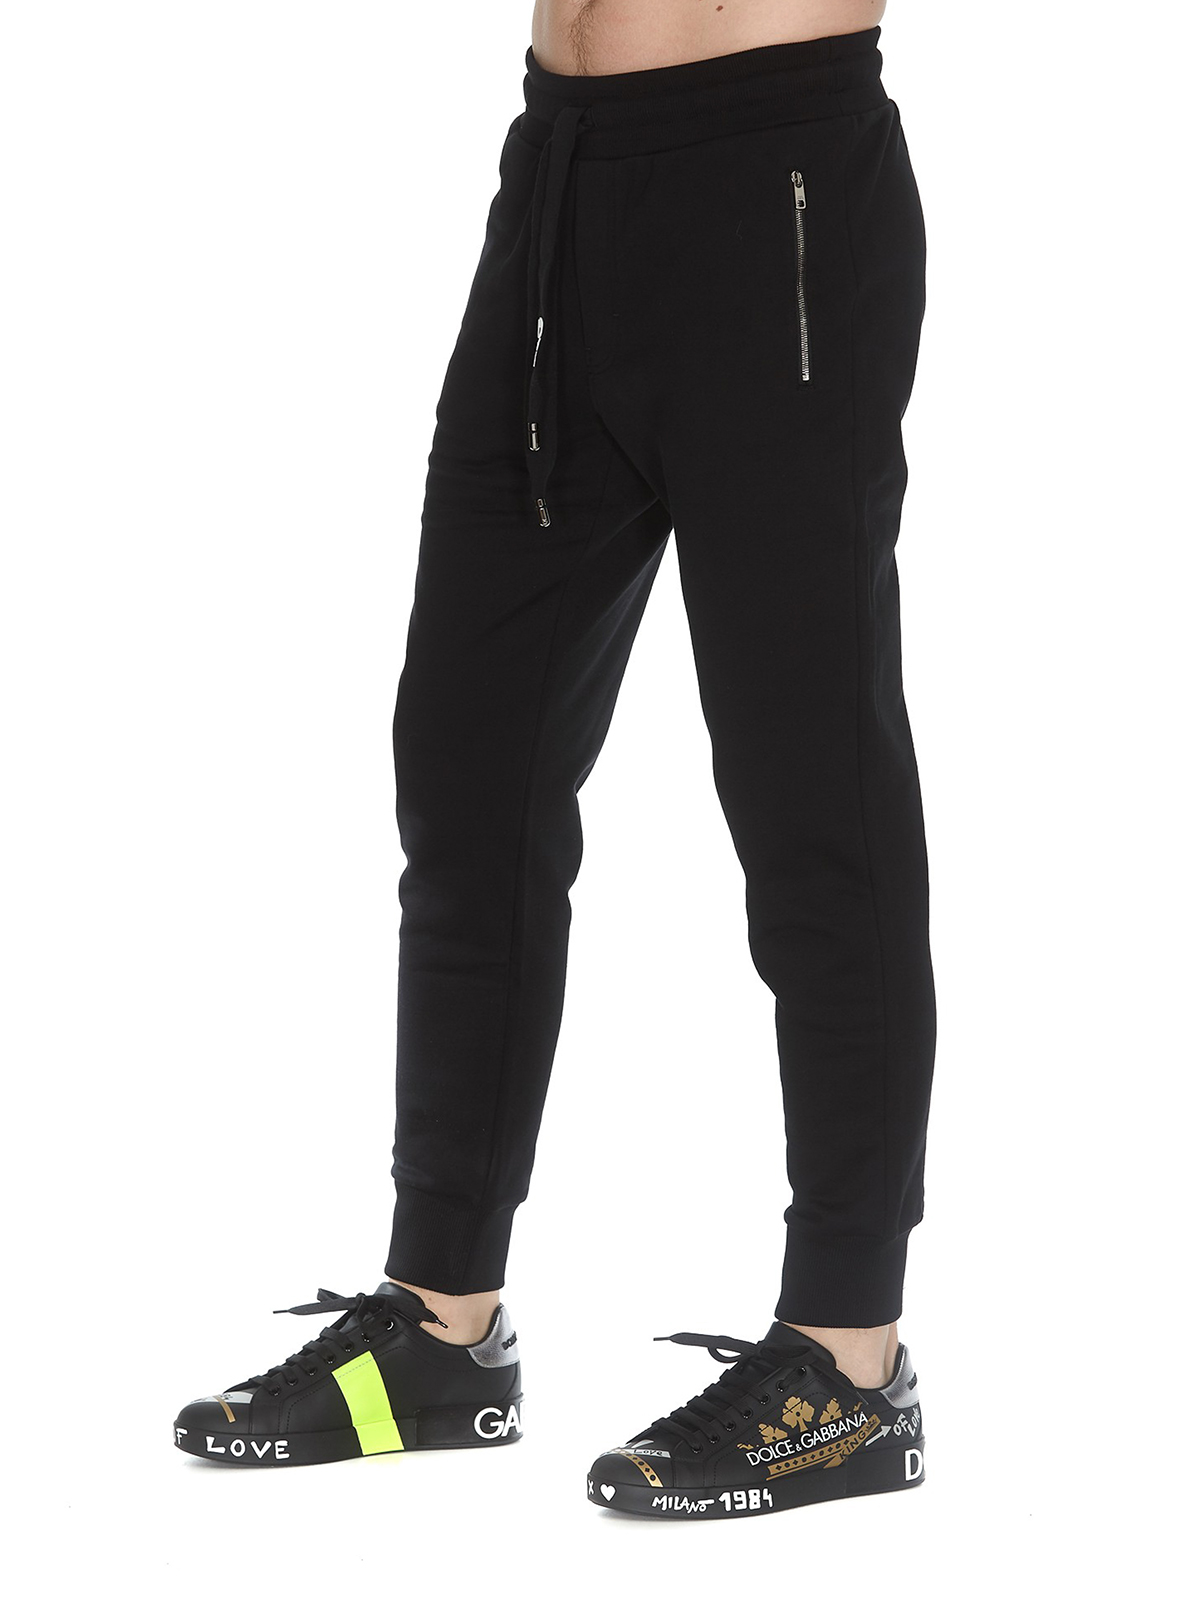 Dolce  Gabbana Jogging Track Pants with Zip Details Pockets and Logo  Black  FASHION ROOMS